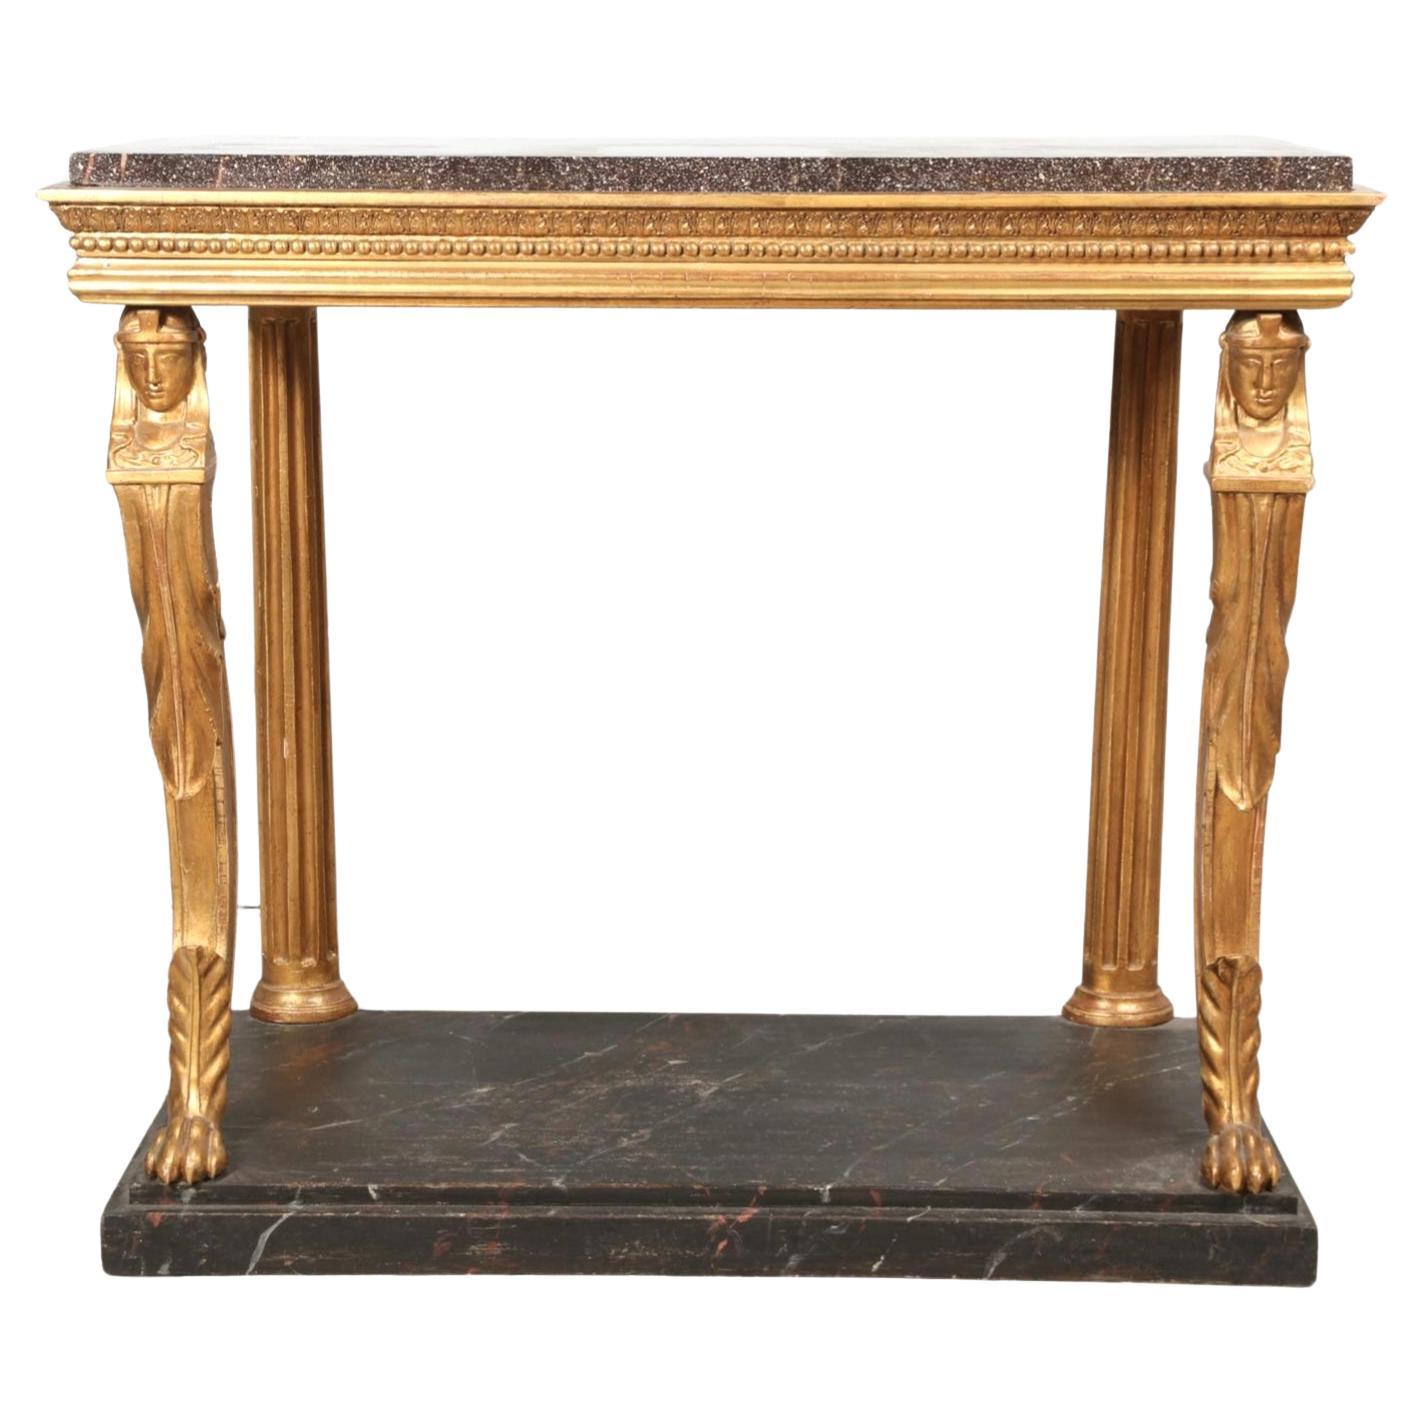 Swedish Neoclassical Giltwood Porphyry Top Console Table, Early 19th Century In Good Condition For Sale In Bradenton, FL